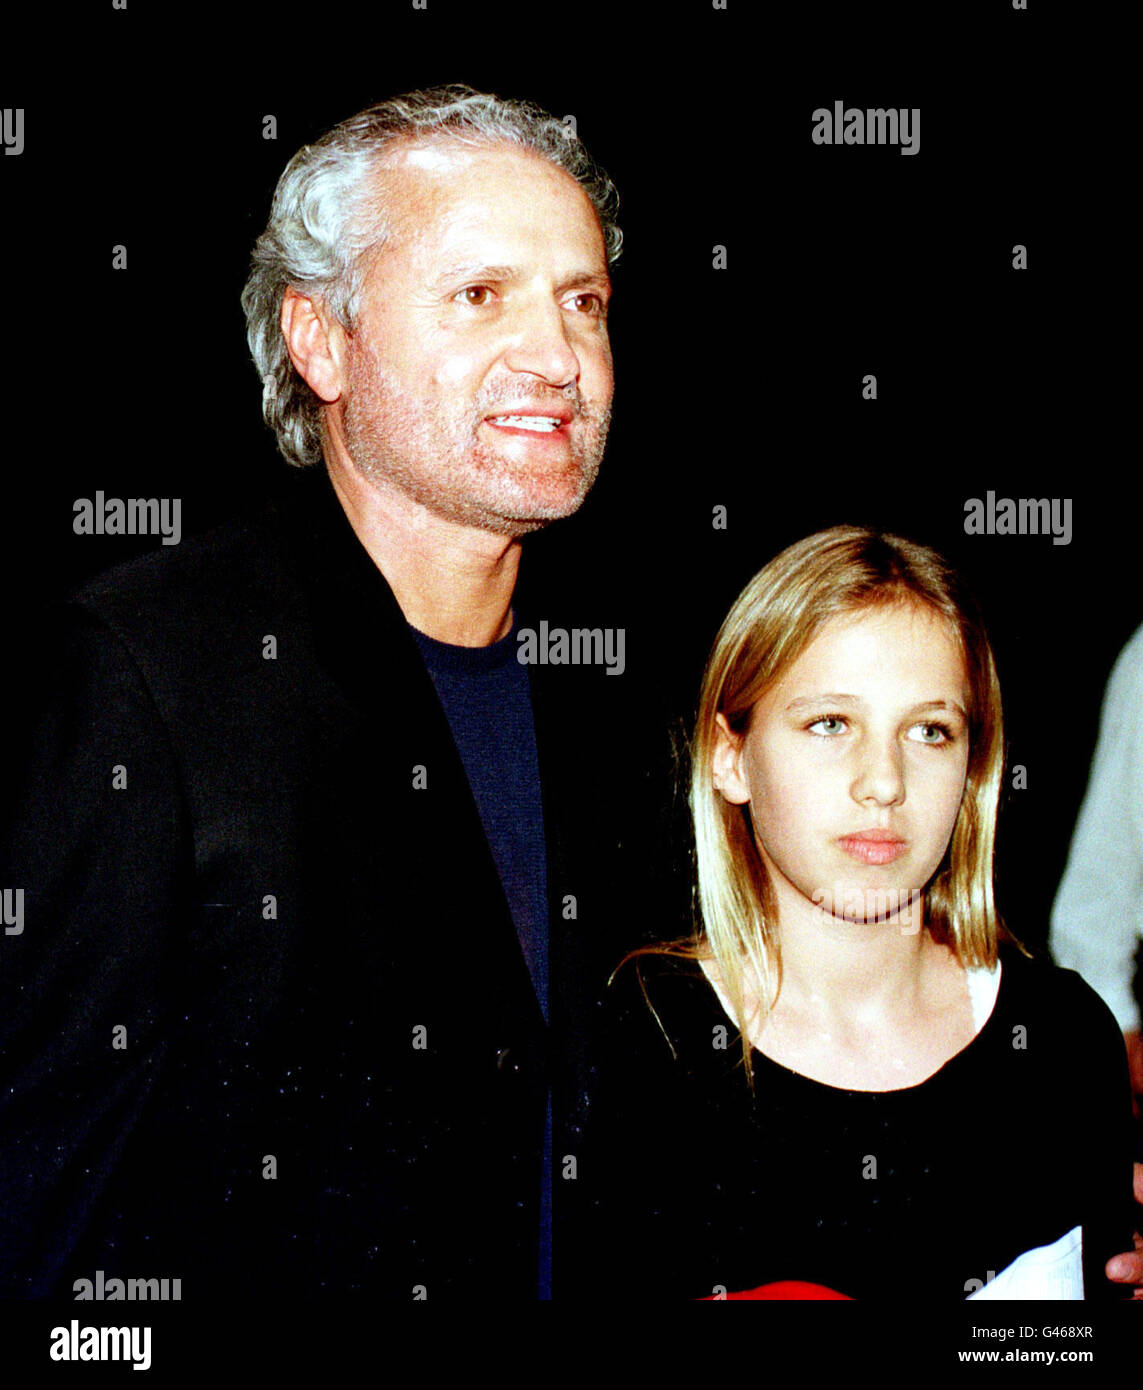 FASHION DESIGNER GIANNI VERSACE AND HIS NIECE ALLEGRA AT THE